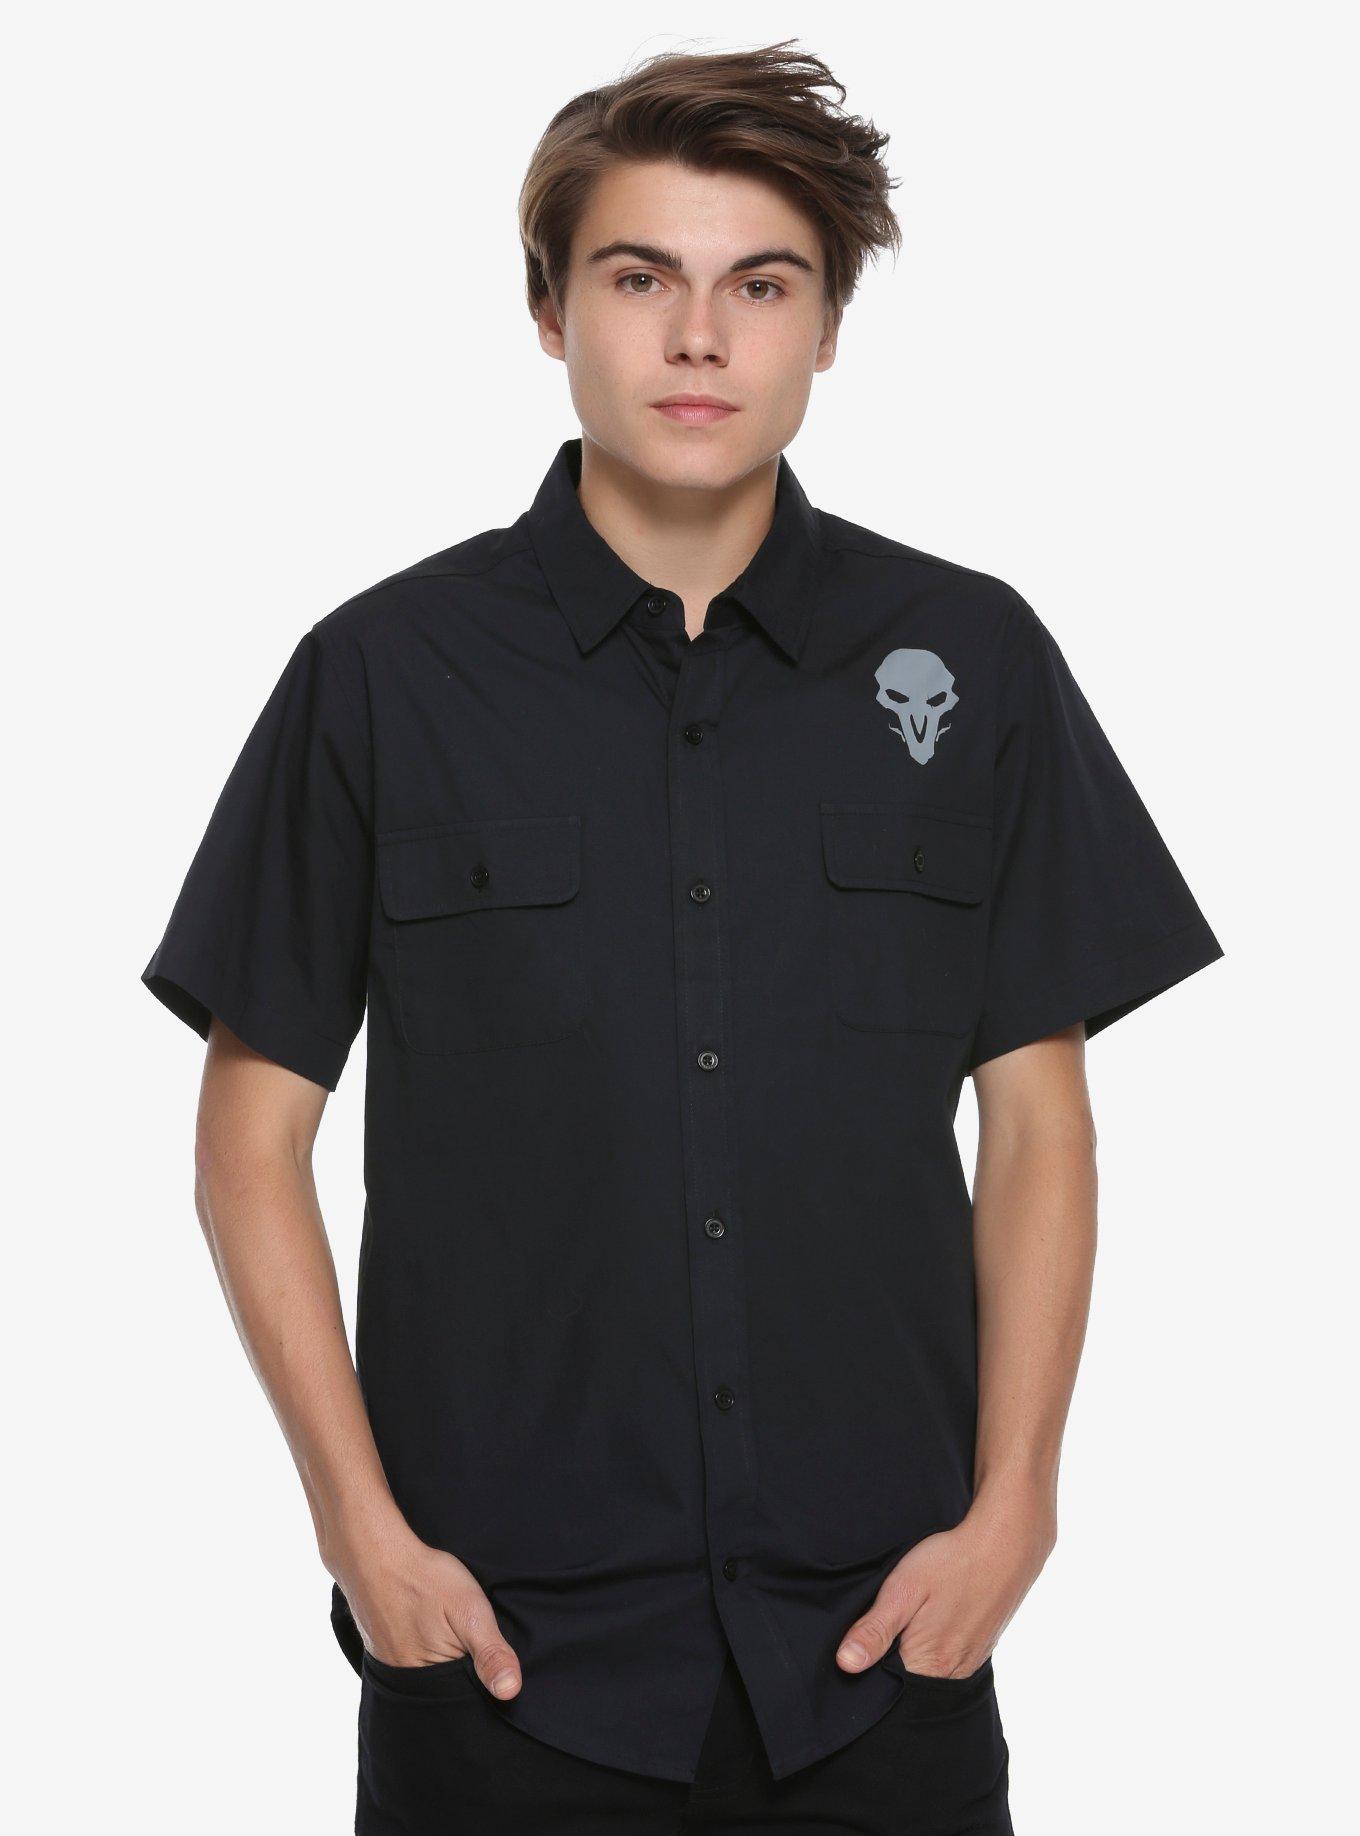 Overwatch Reaper Woven Button-Up Hot Topic Exclusive, BLACK, hi-res